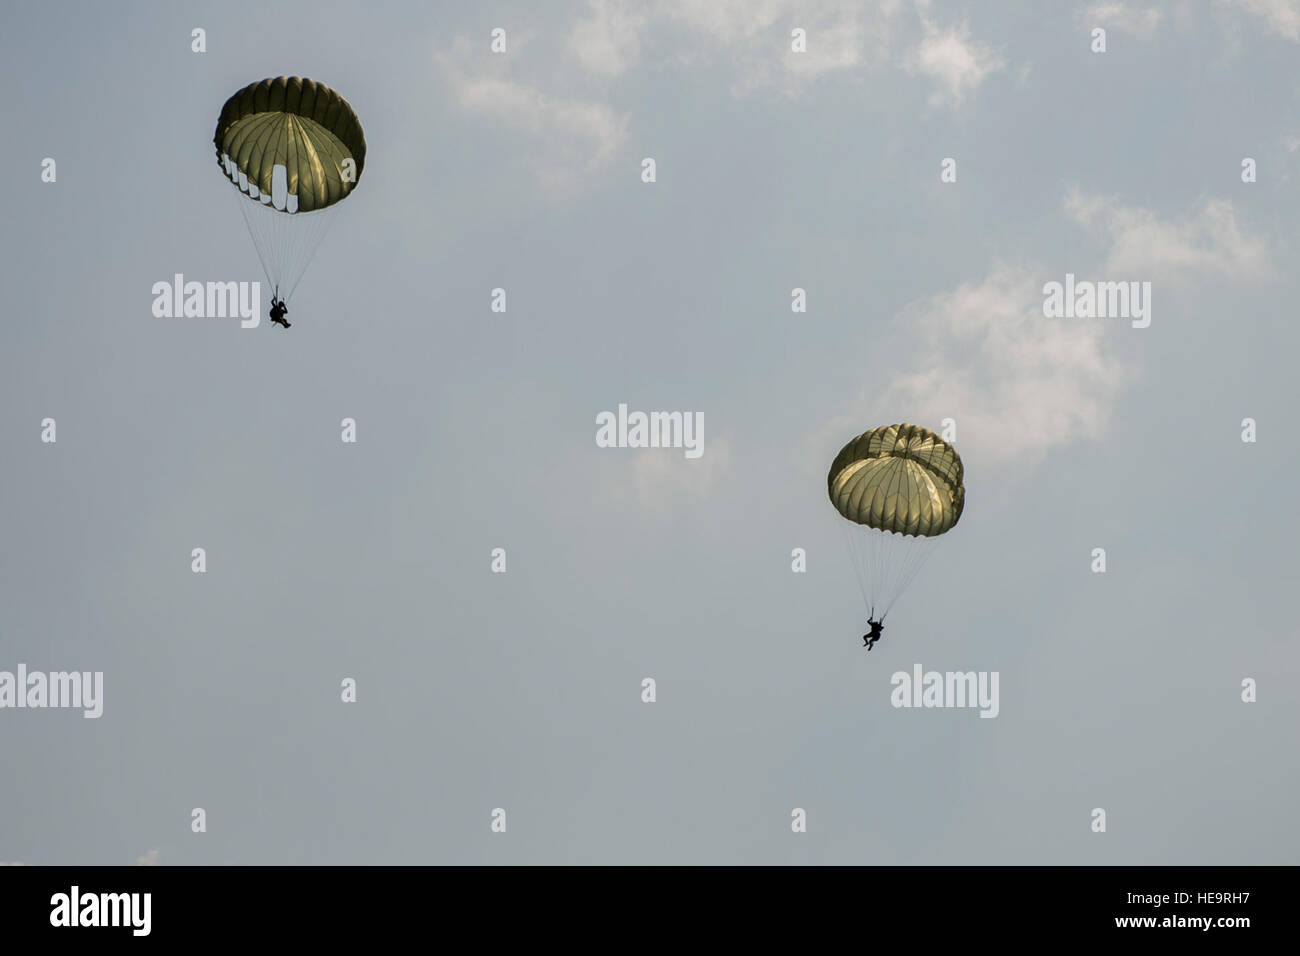 U.S. Air Force, Thai and Singaporean military conduct static and High Altitude Low Opening jumps from a U.S. C-130 during Exercise Cope Tiger 15 near Korat, Thailand, March 10, 2015. CT15 includes 22 total flying units and over 1,390 personnel from three countries and continues the growth of strong, interoperable and beneficial relationships within the Asia-Pacific region through integration of airborne and land-based command and control assets.  Airman 1st Class Taylor Queen Stock Photo